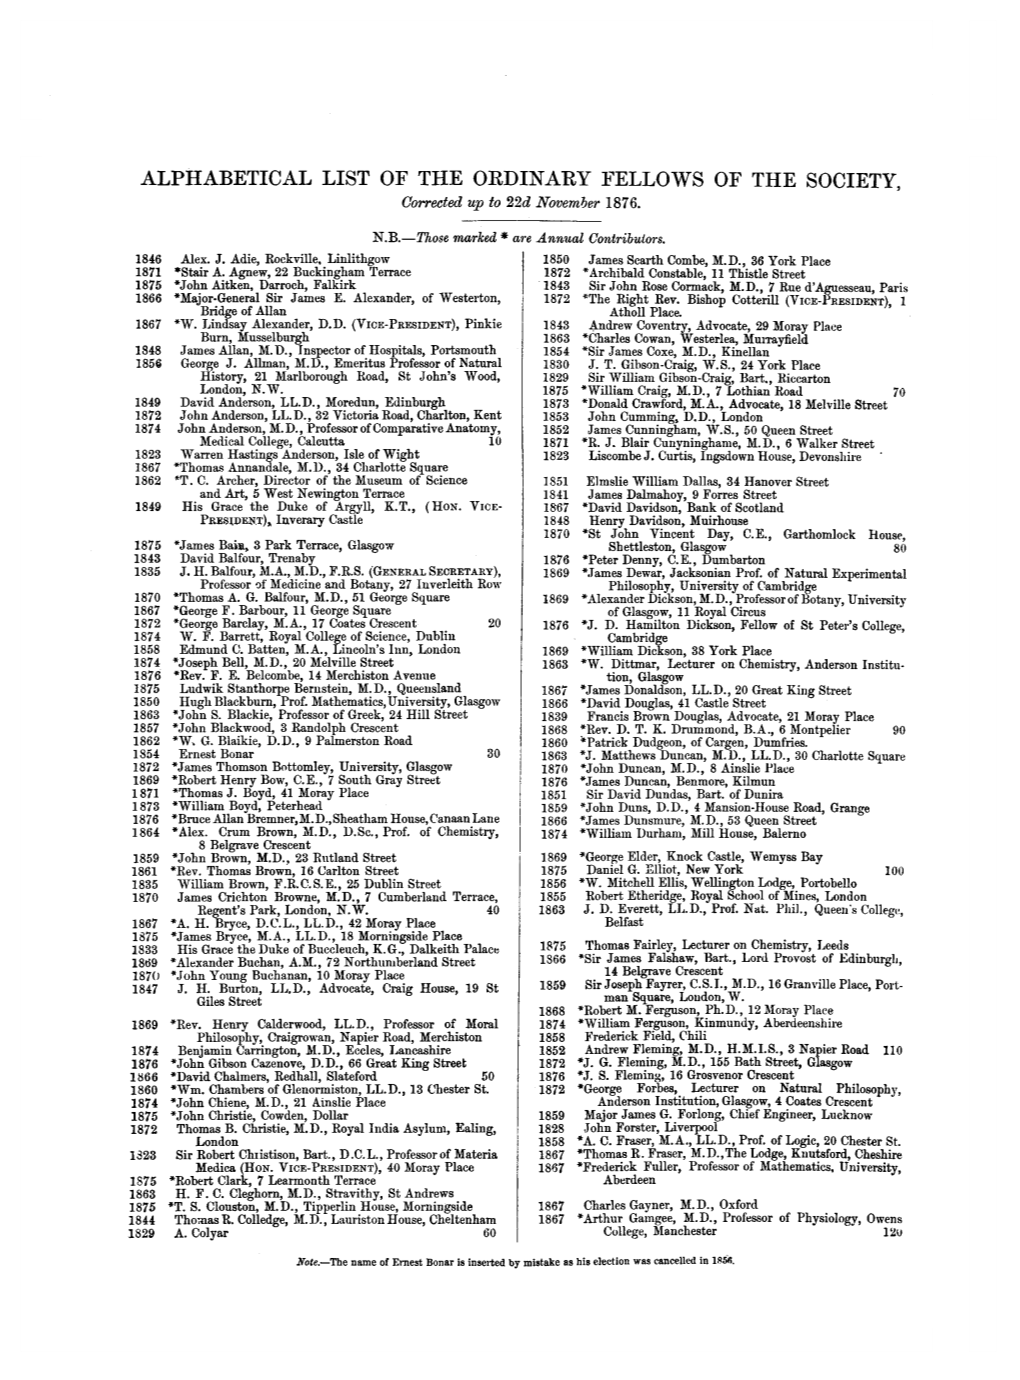 ALPHABETICAL LIST of the OEDINAEY FELLOWS of the SOCIETY, Corrected up to 22D November 1876